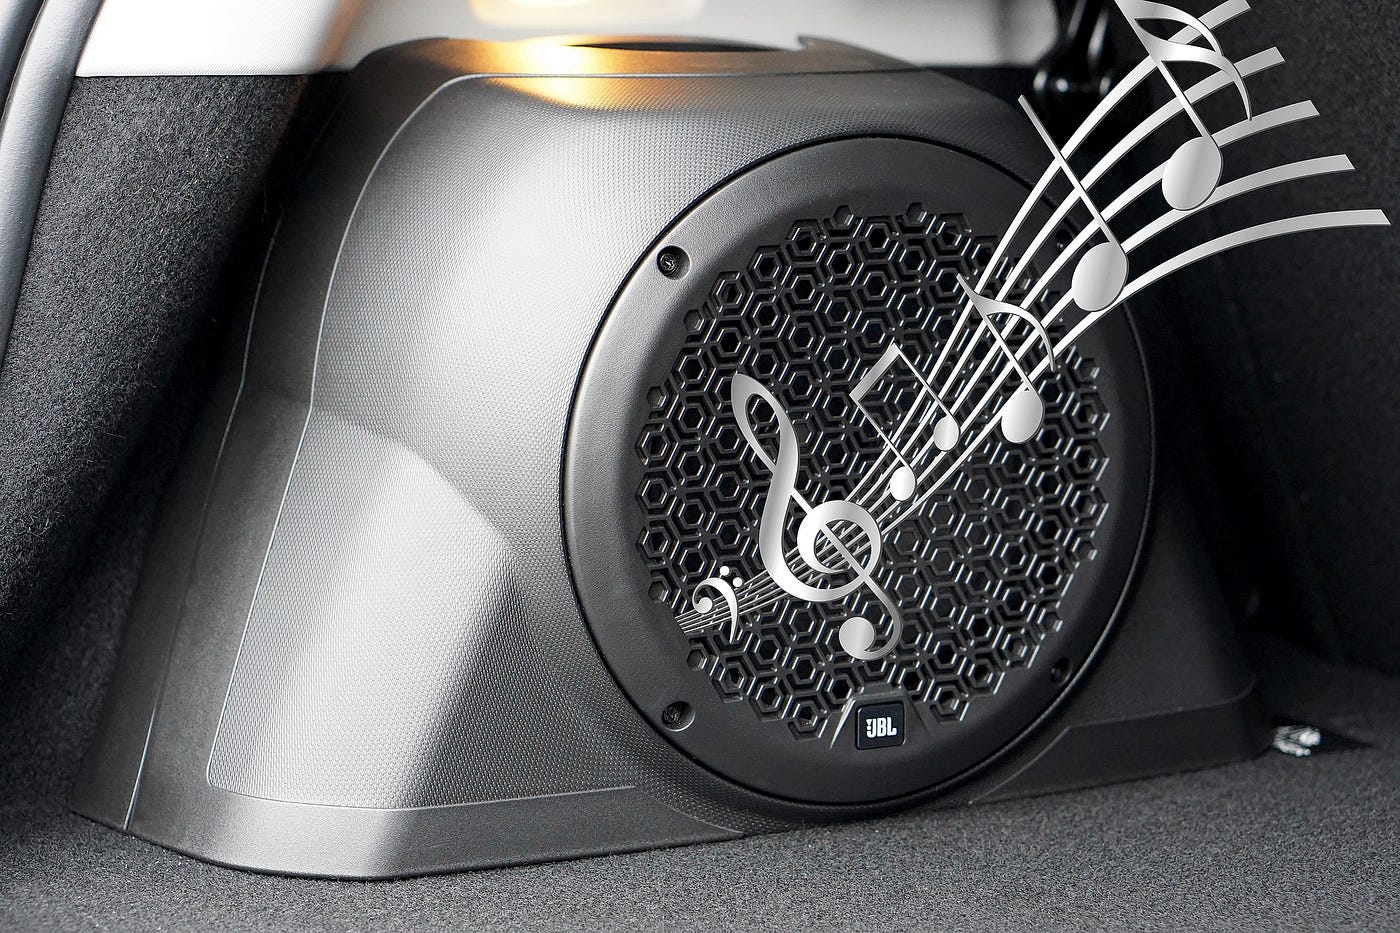 Aftermarket Car Audio: Everything You Need to Know | by Georgie Hawthorne |  Medium